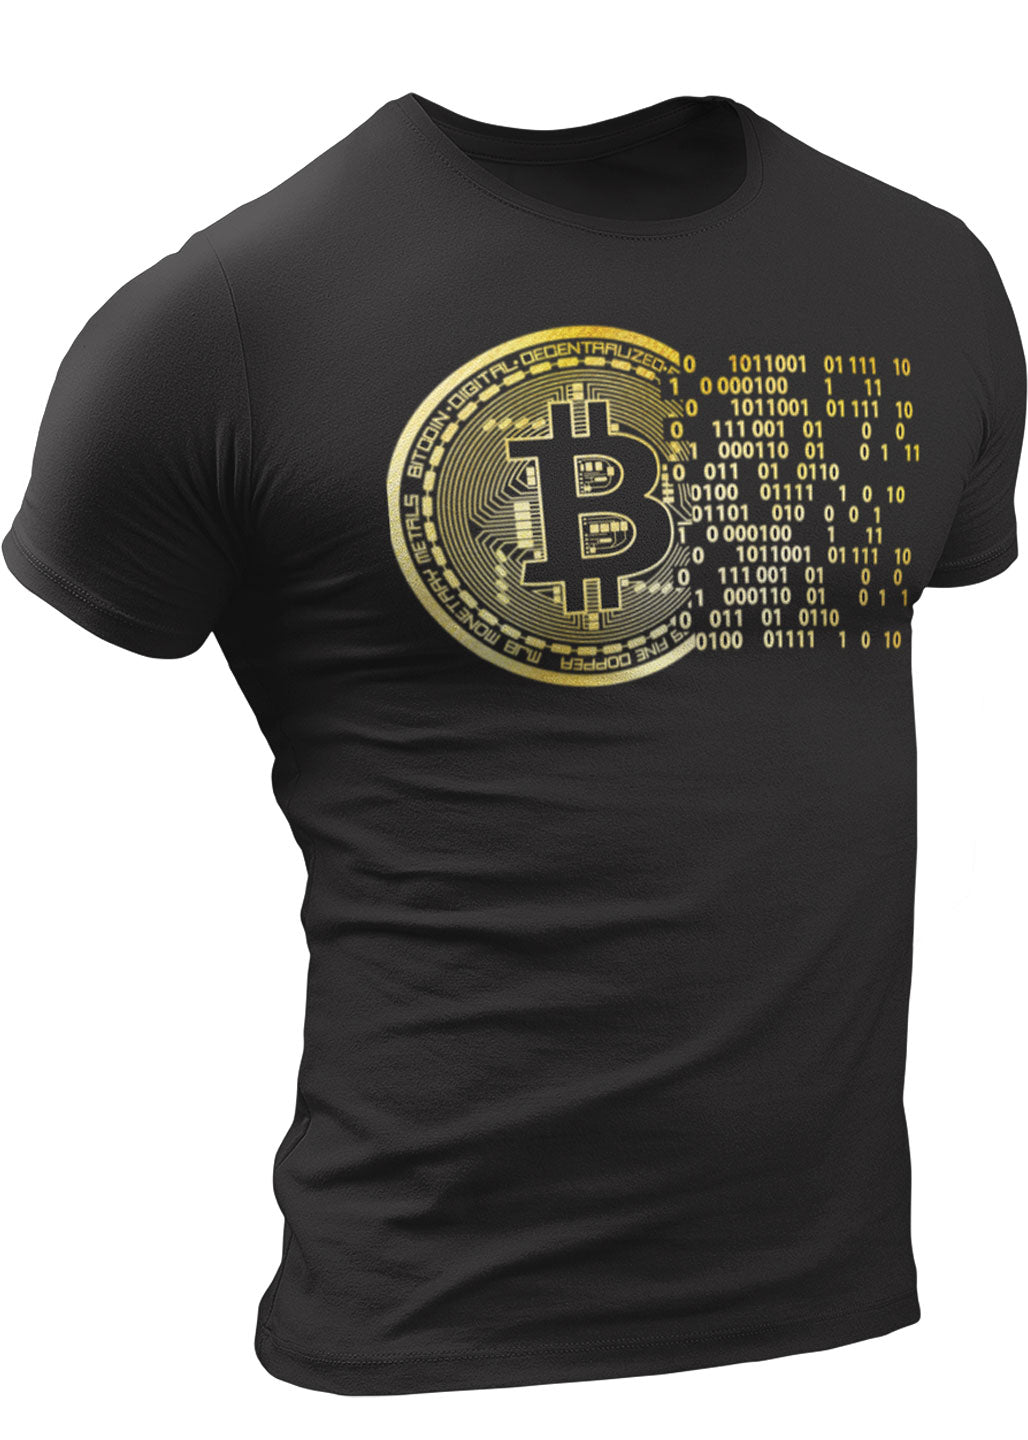 (0075) Vintage Golden Bitcoin T-Shirt For Crypto Currency Traders ...